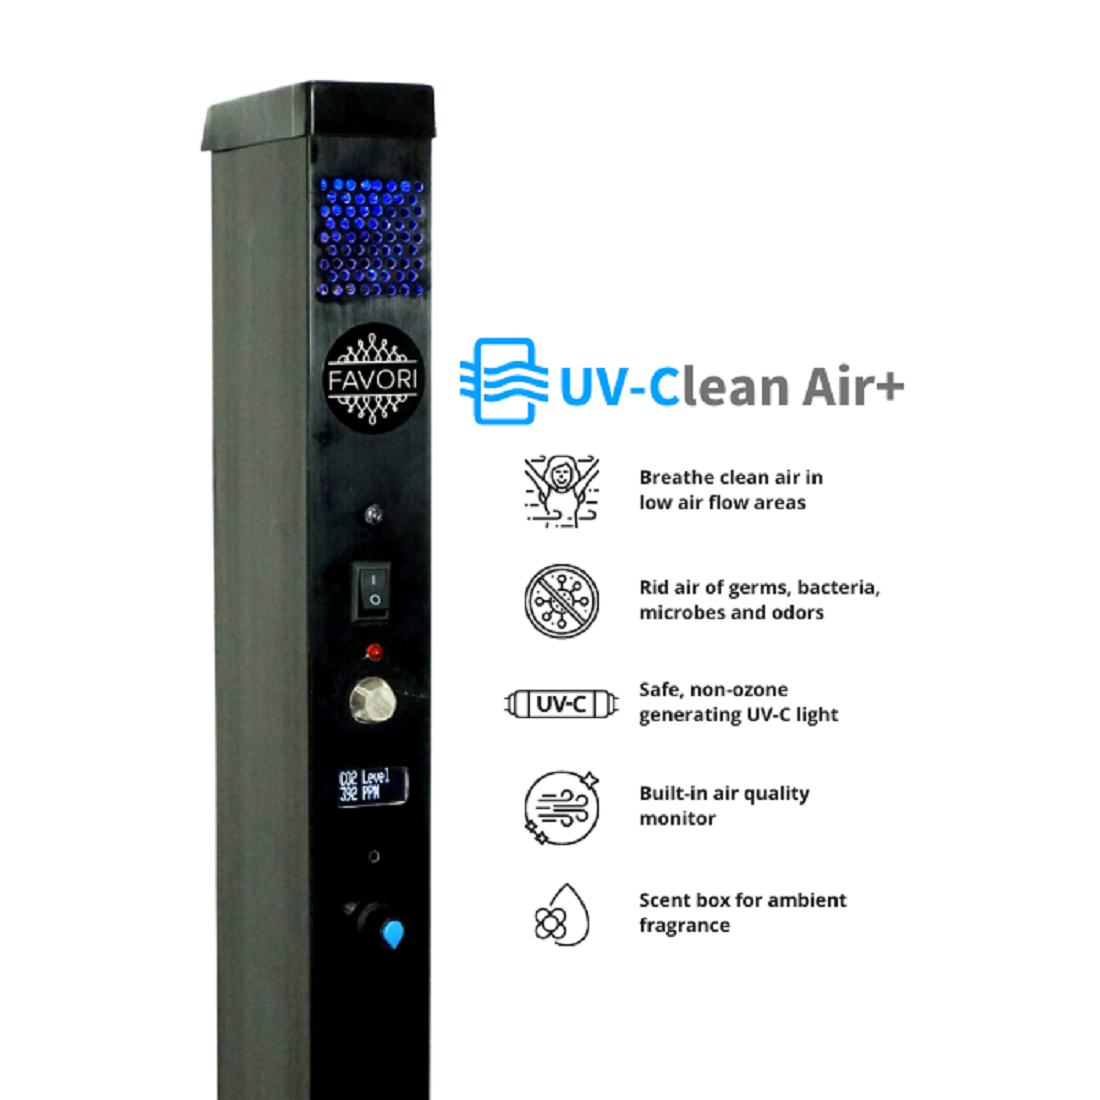 An UV-Clean Air Plus with uv-c light and built-in oil fragrance dispenser for indoor use by FAVORI Scents.